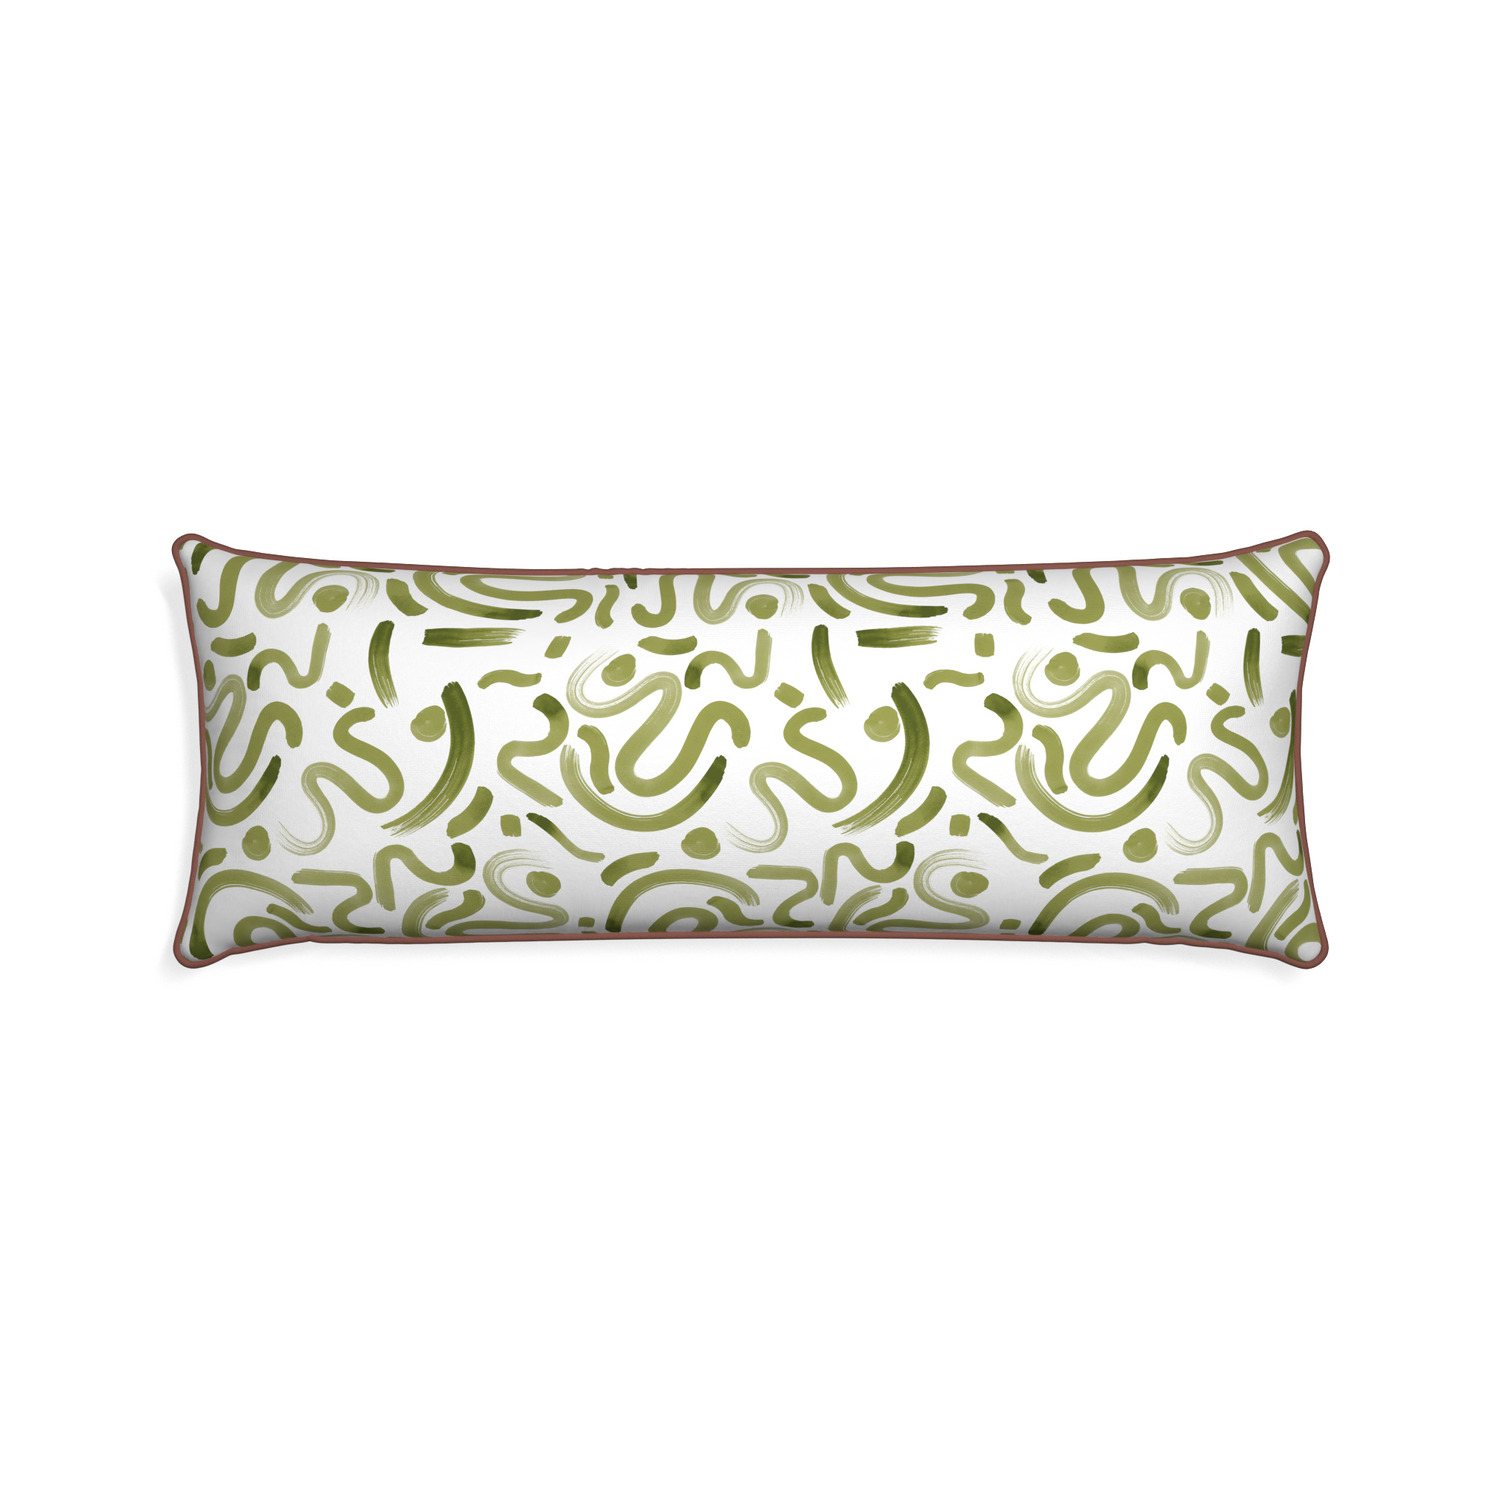 Xl-lumbar hockney moss custom moss greenpillow with w piping on white background